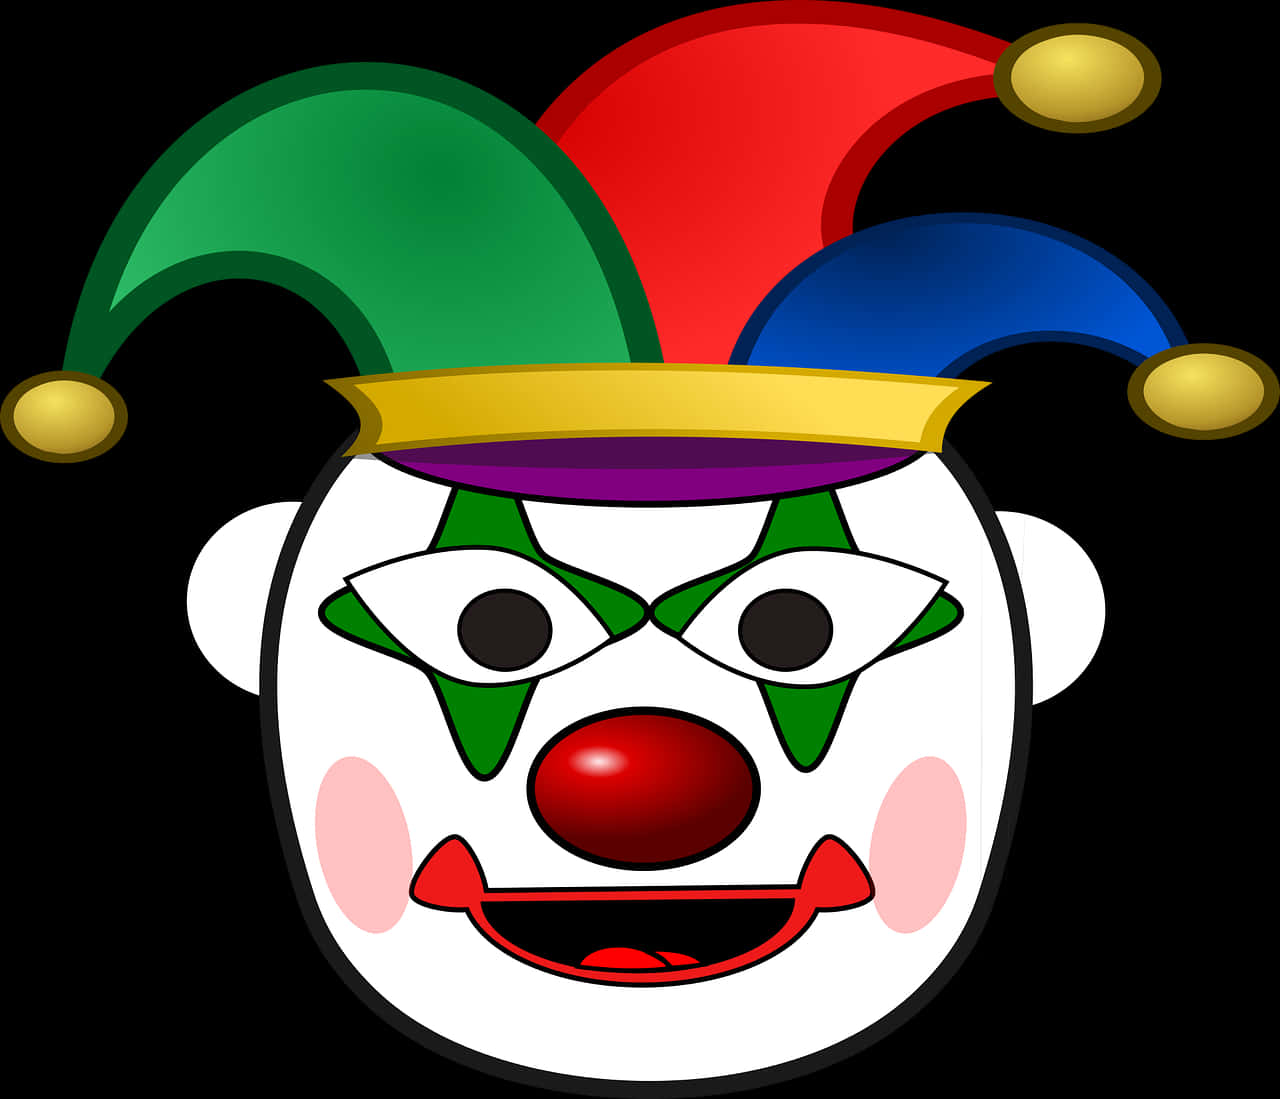 Colorful Clown Face Graphic PNG